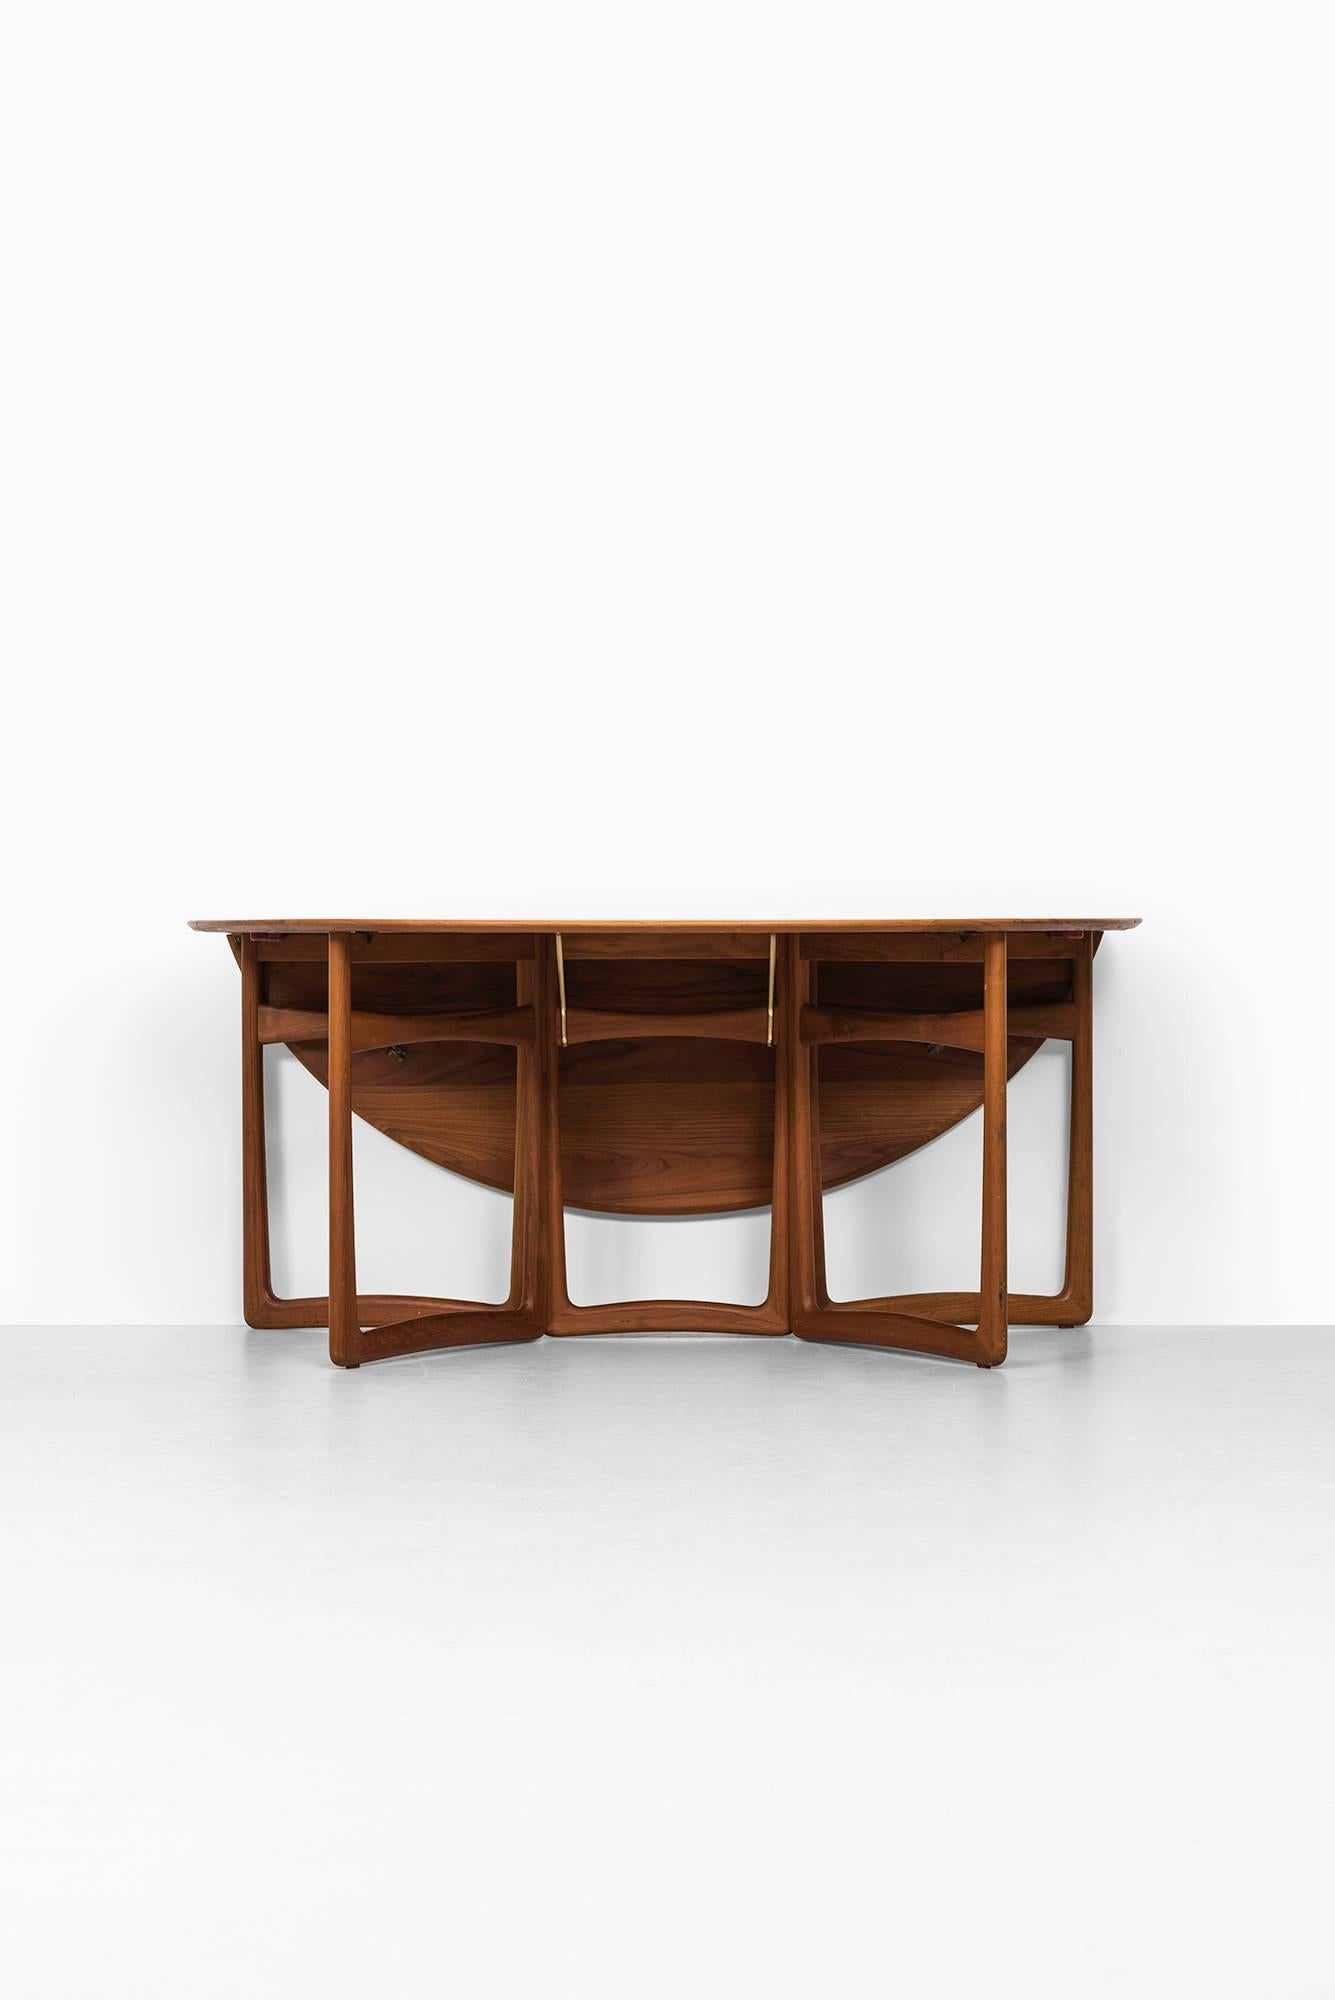 Rare drop-leaf dining and console table designed by Peter Hvidt & Orla Mølgaard-Nielsen. Produced by France & Son in Denmark.